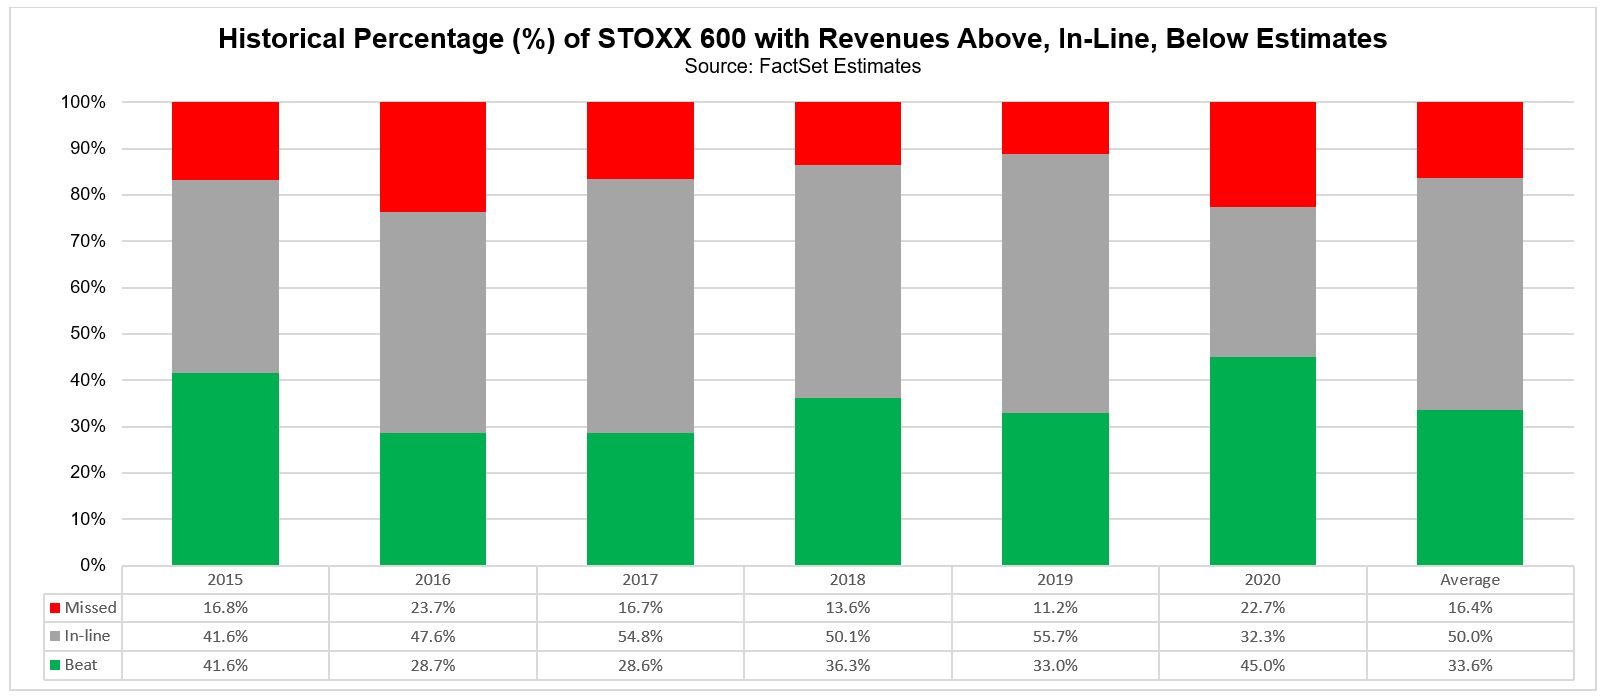 Historical percentage of STOXX 600 cos with revenues above inline below estimates